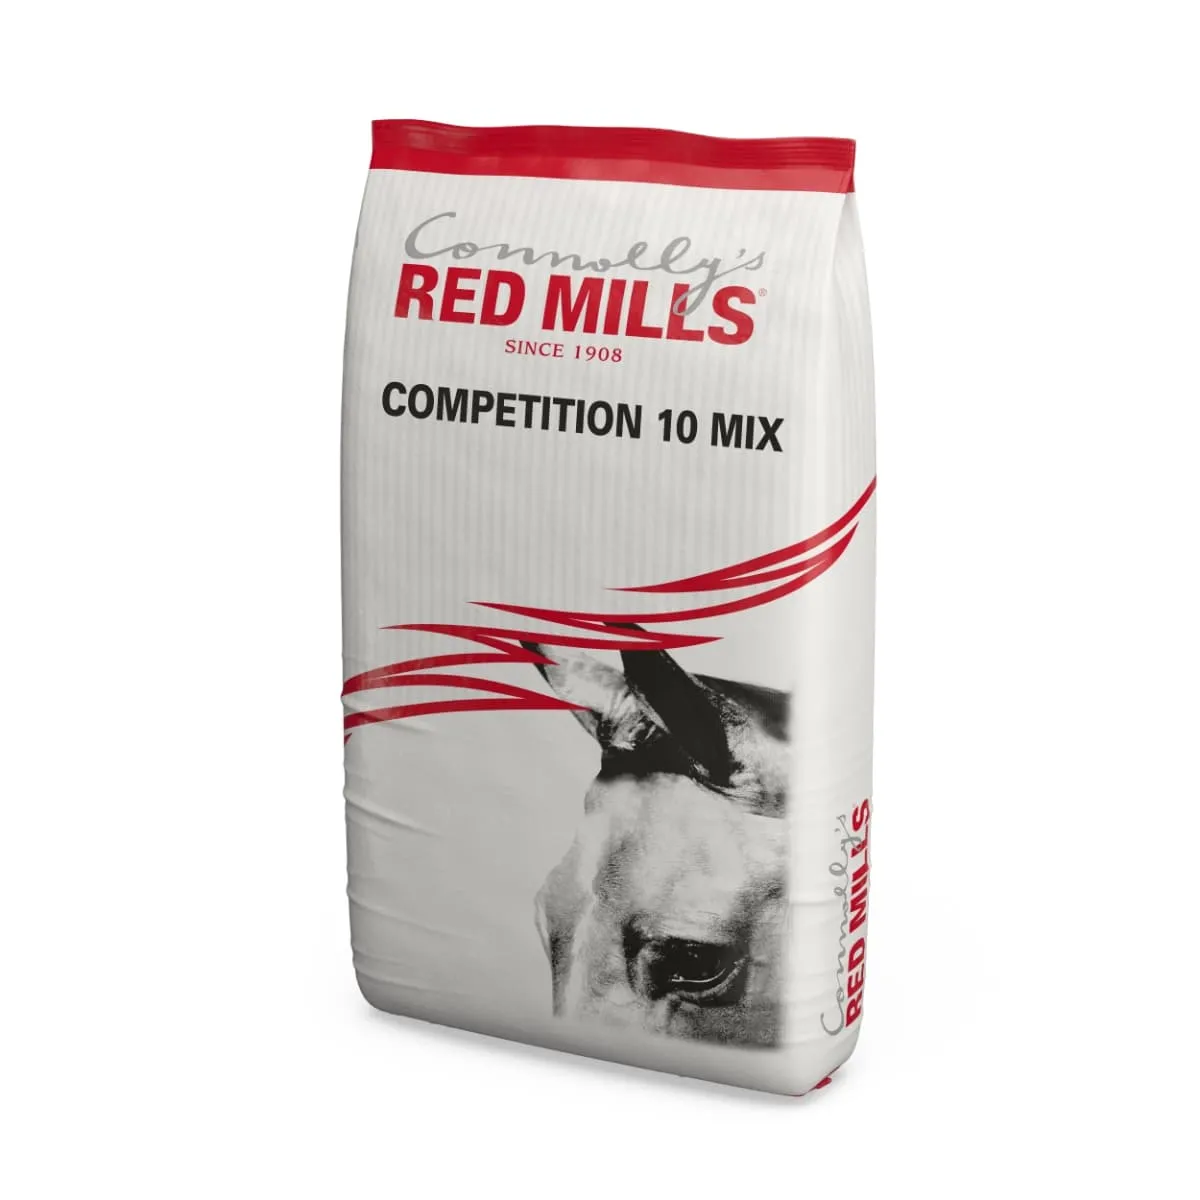 RED MILLS Competition 10 Mix